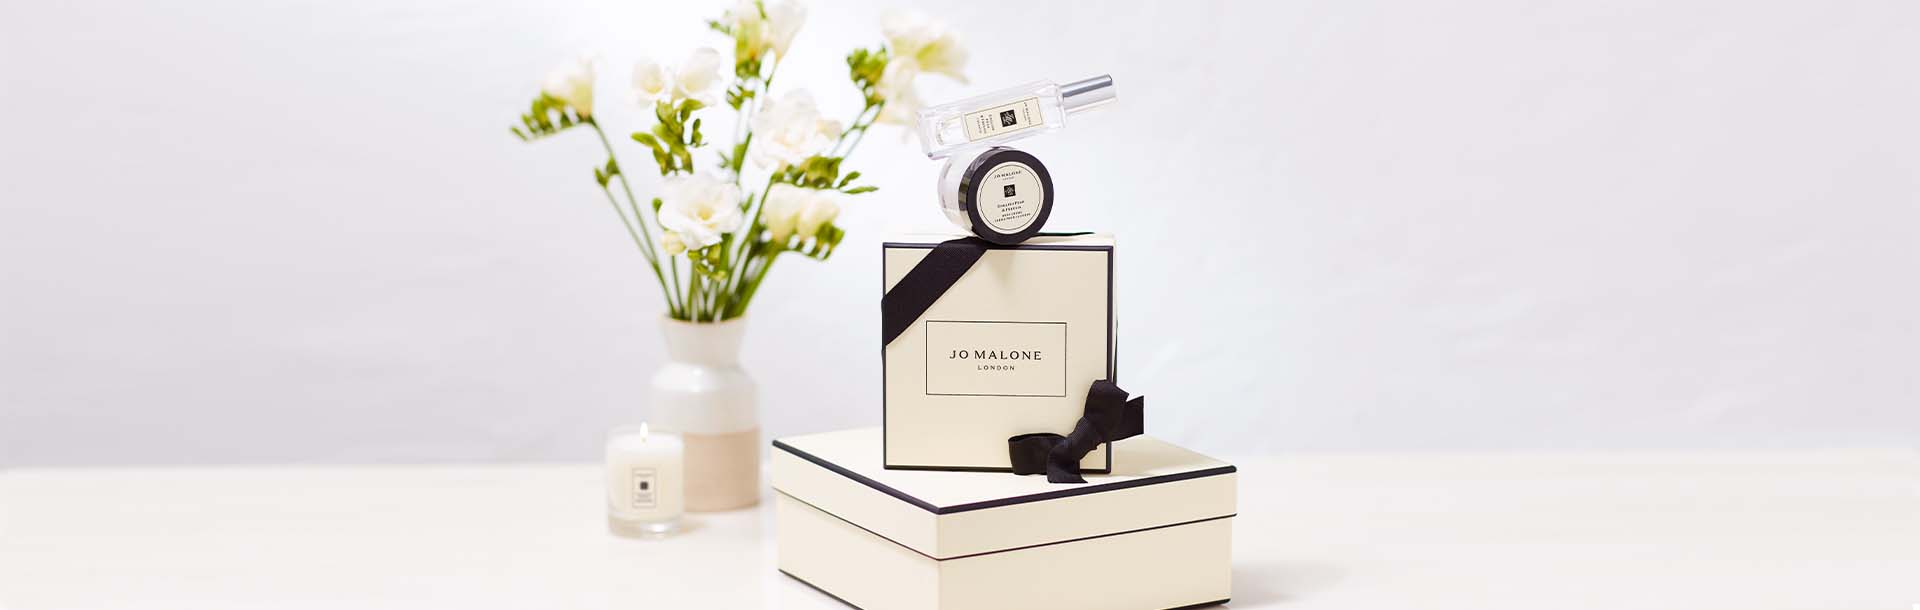 iconic jo malone london black & cream gift boxes stacked with a vase of flowers, travel candle & body creme